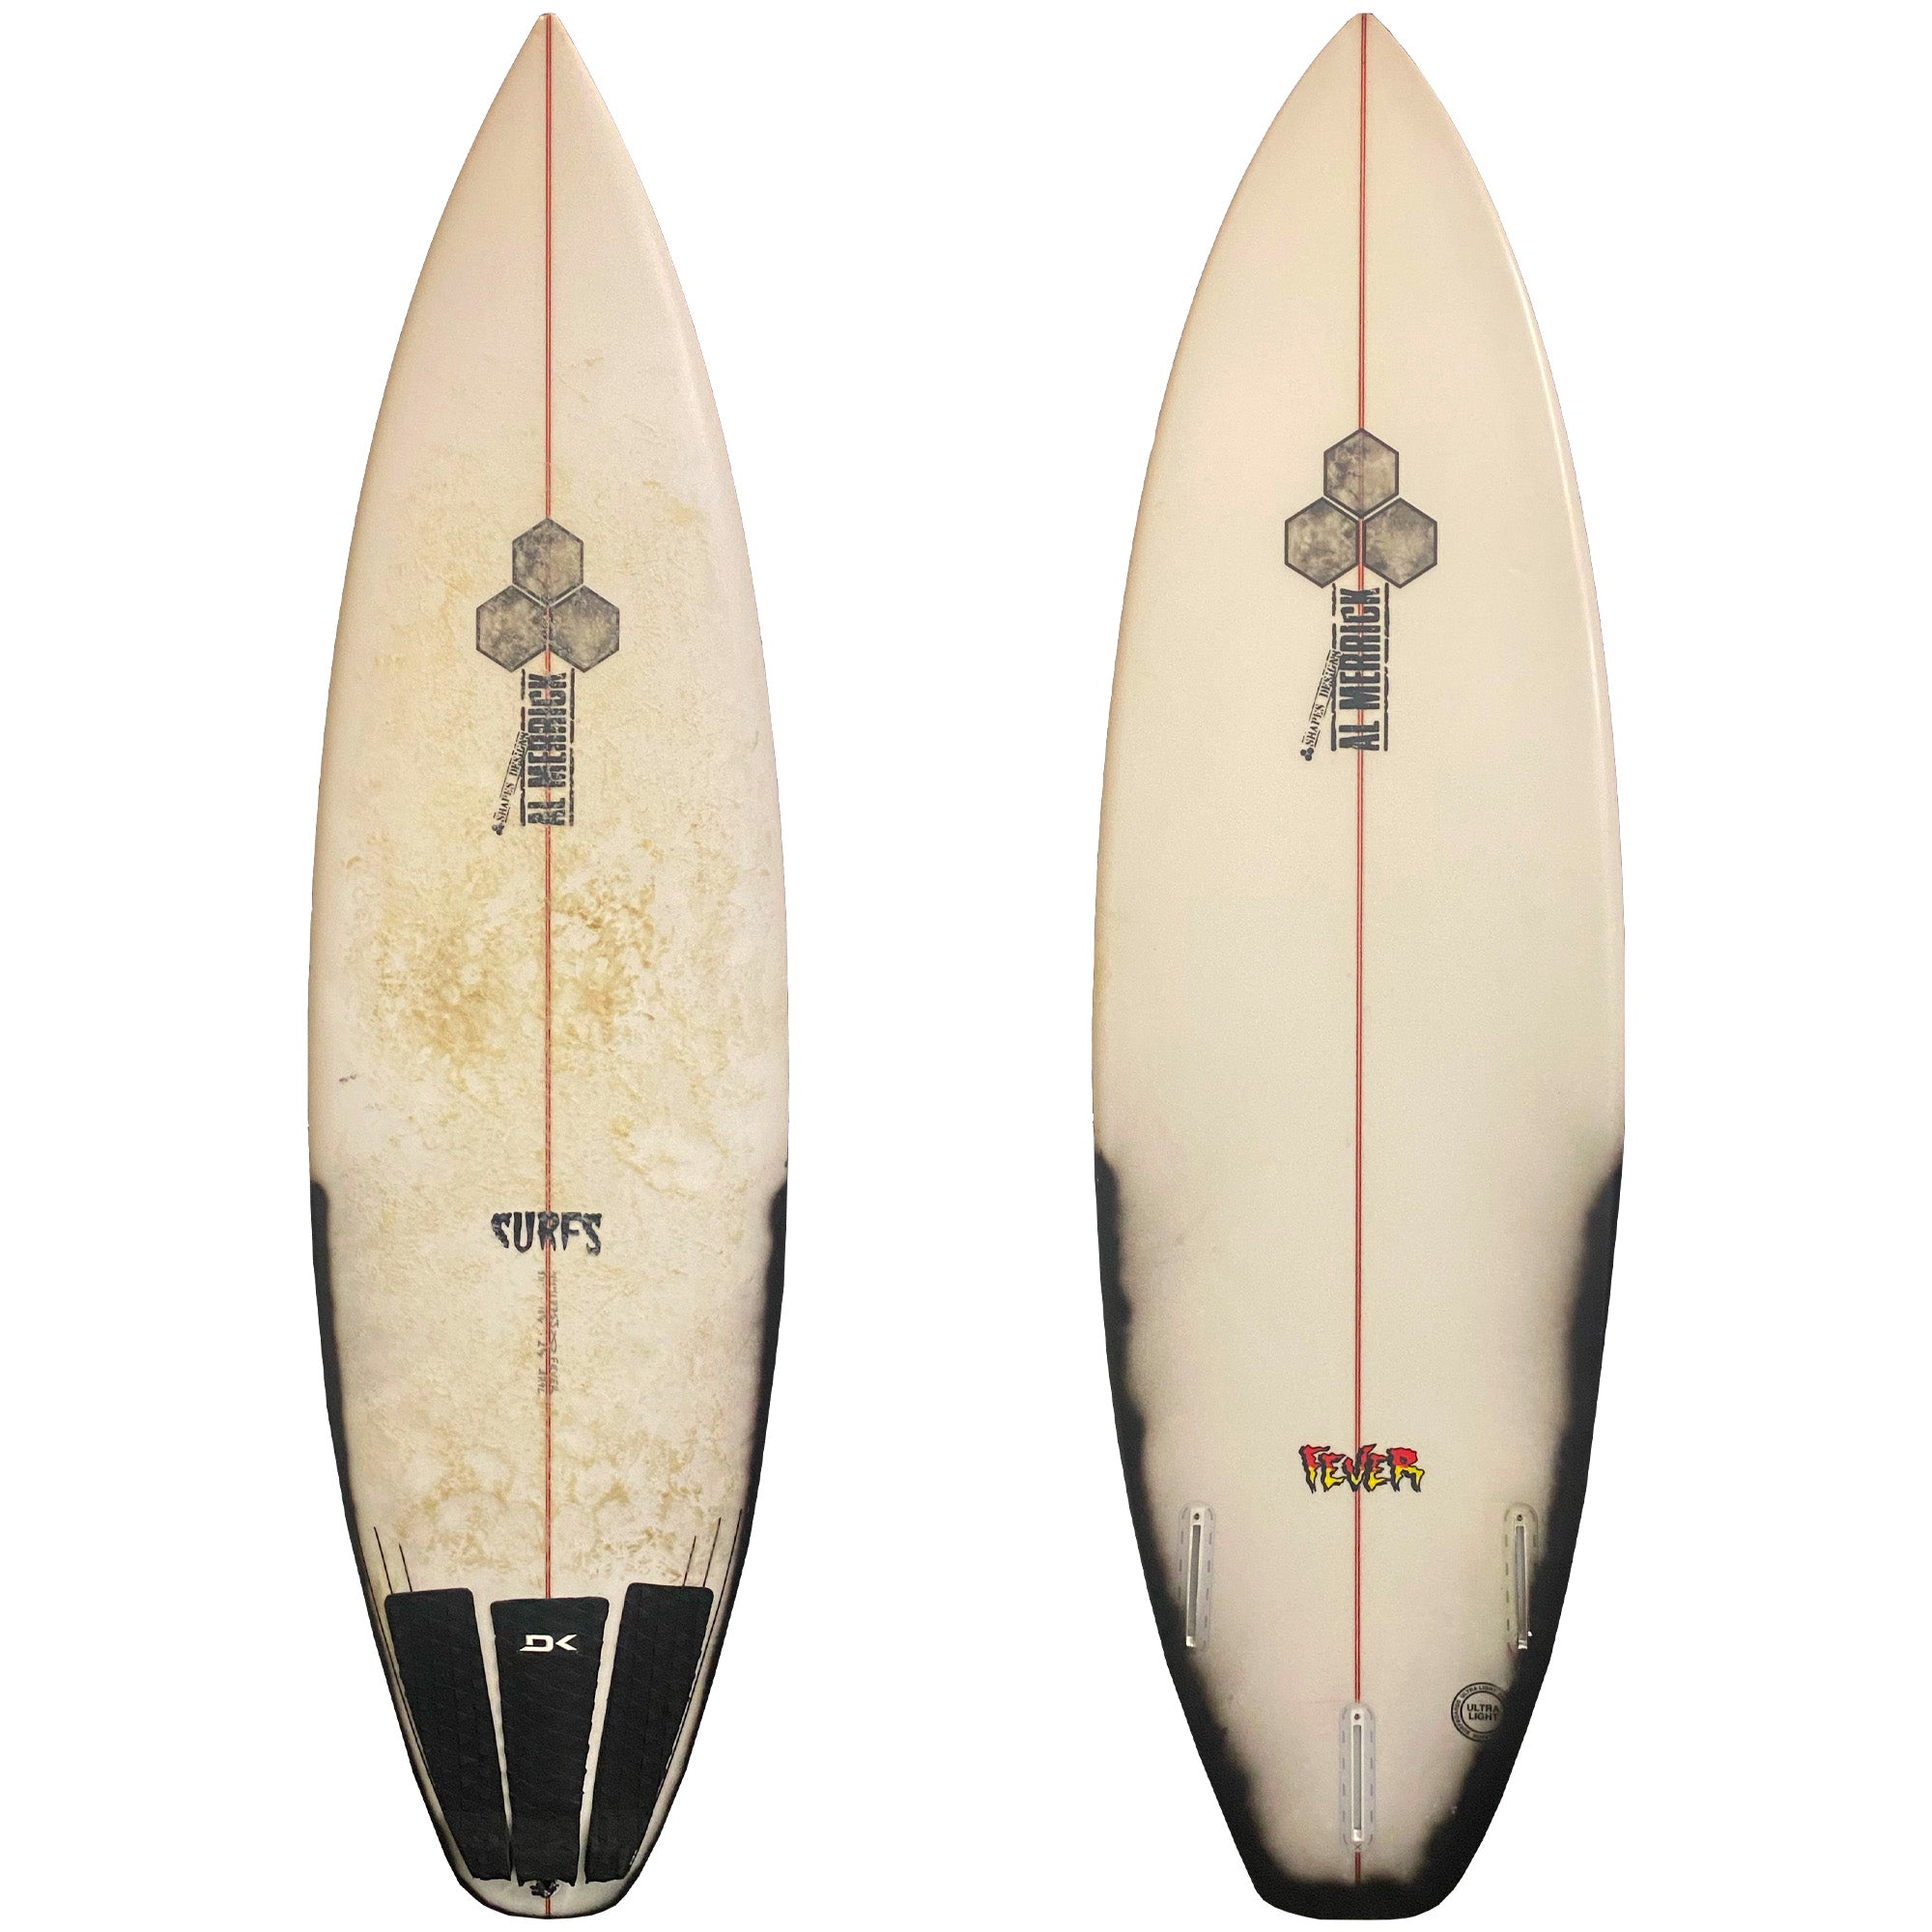 Channel Islands Fever 5'11 Consignment Surfboard - Surf Station Store